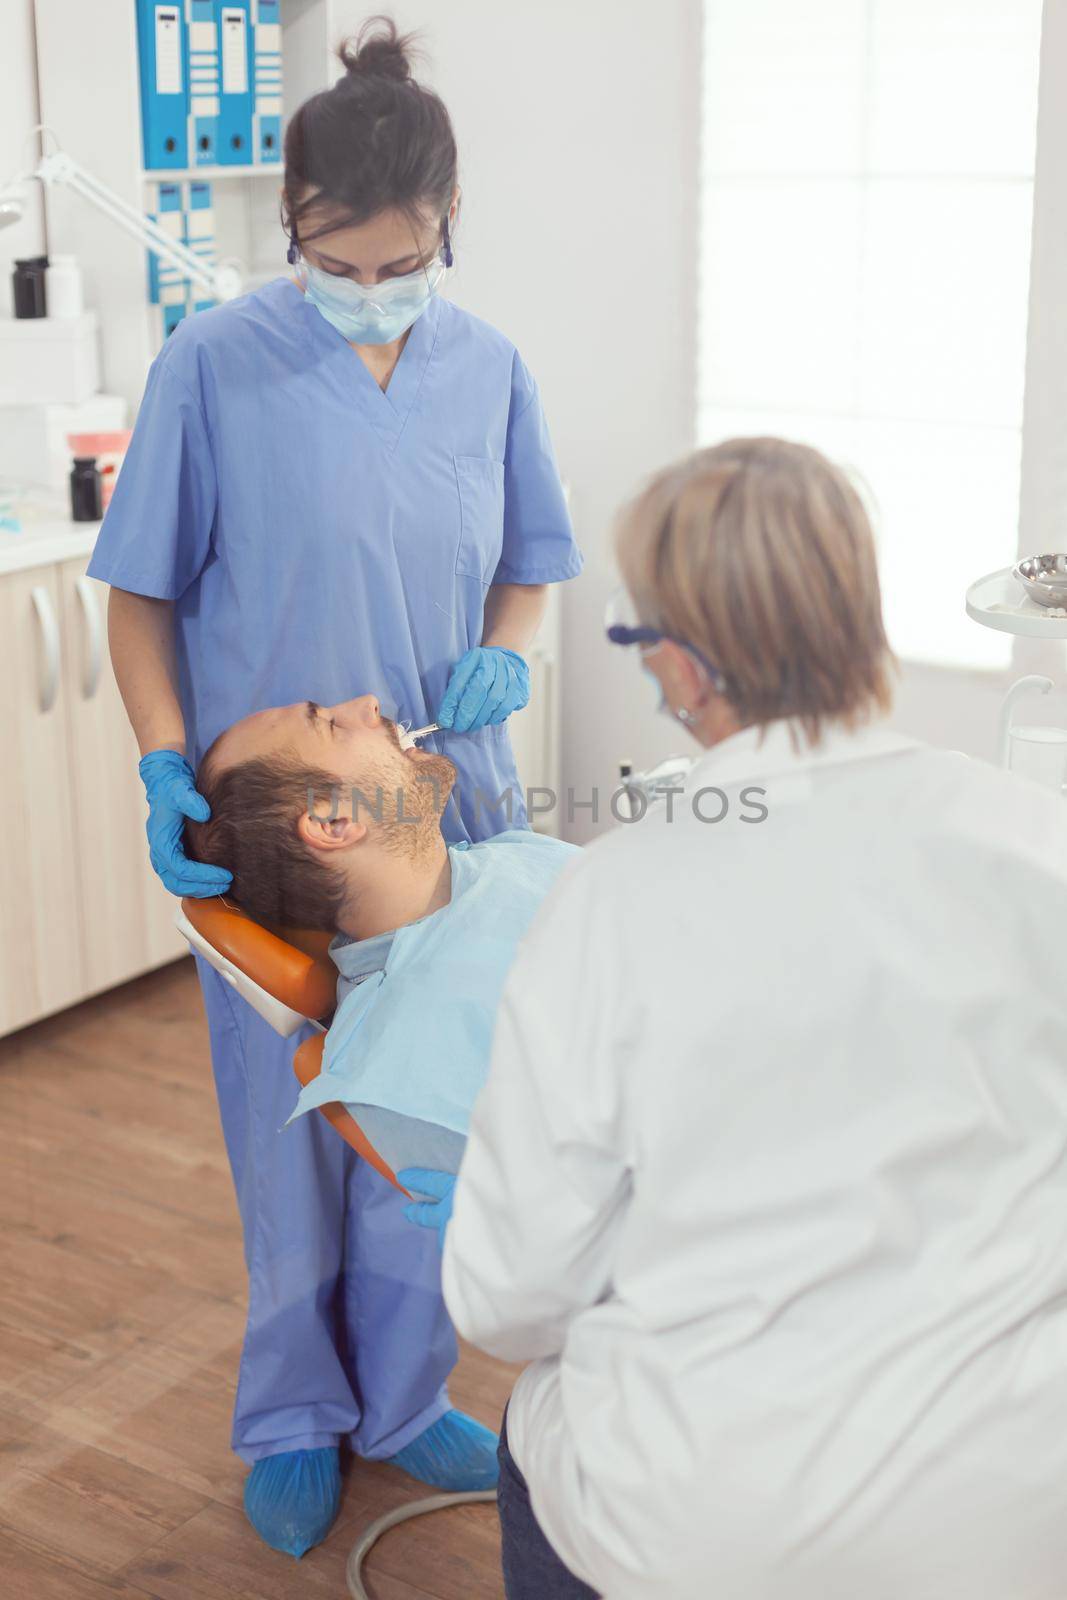 Sick patient lying on dental chair with open mouth for medical procedure by DCStudio